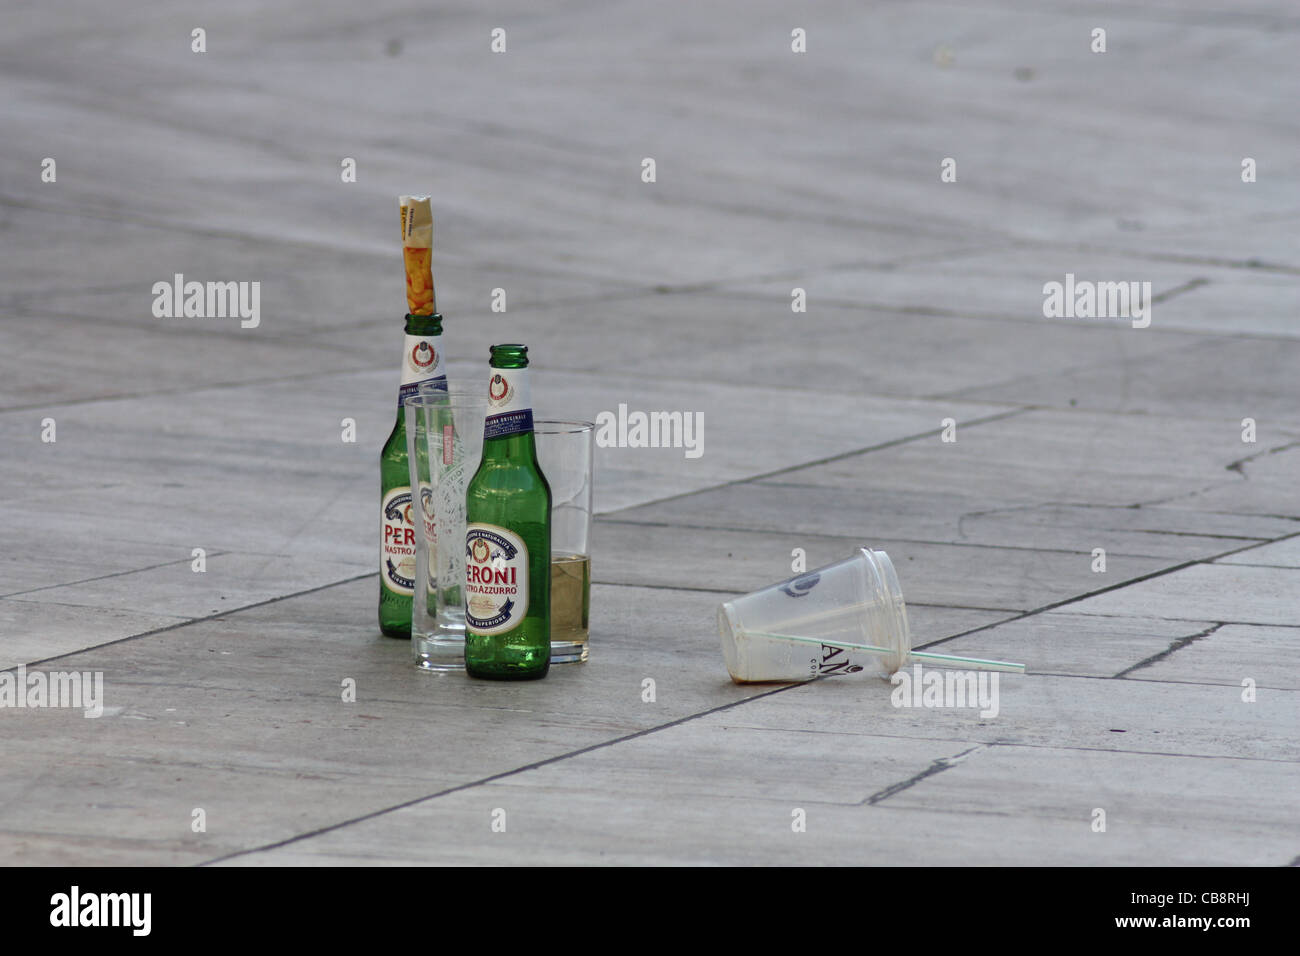 A close up of a glass of beer on a table. Beer peroni glass. - PICRYL -  Public Domain Media Search Engine Public Domain Image